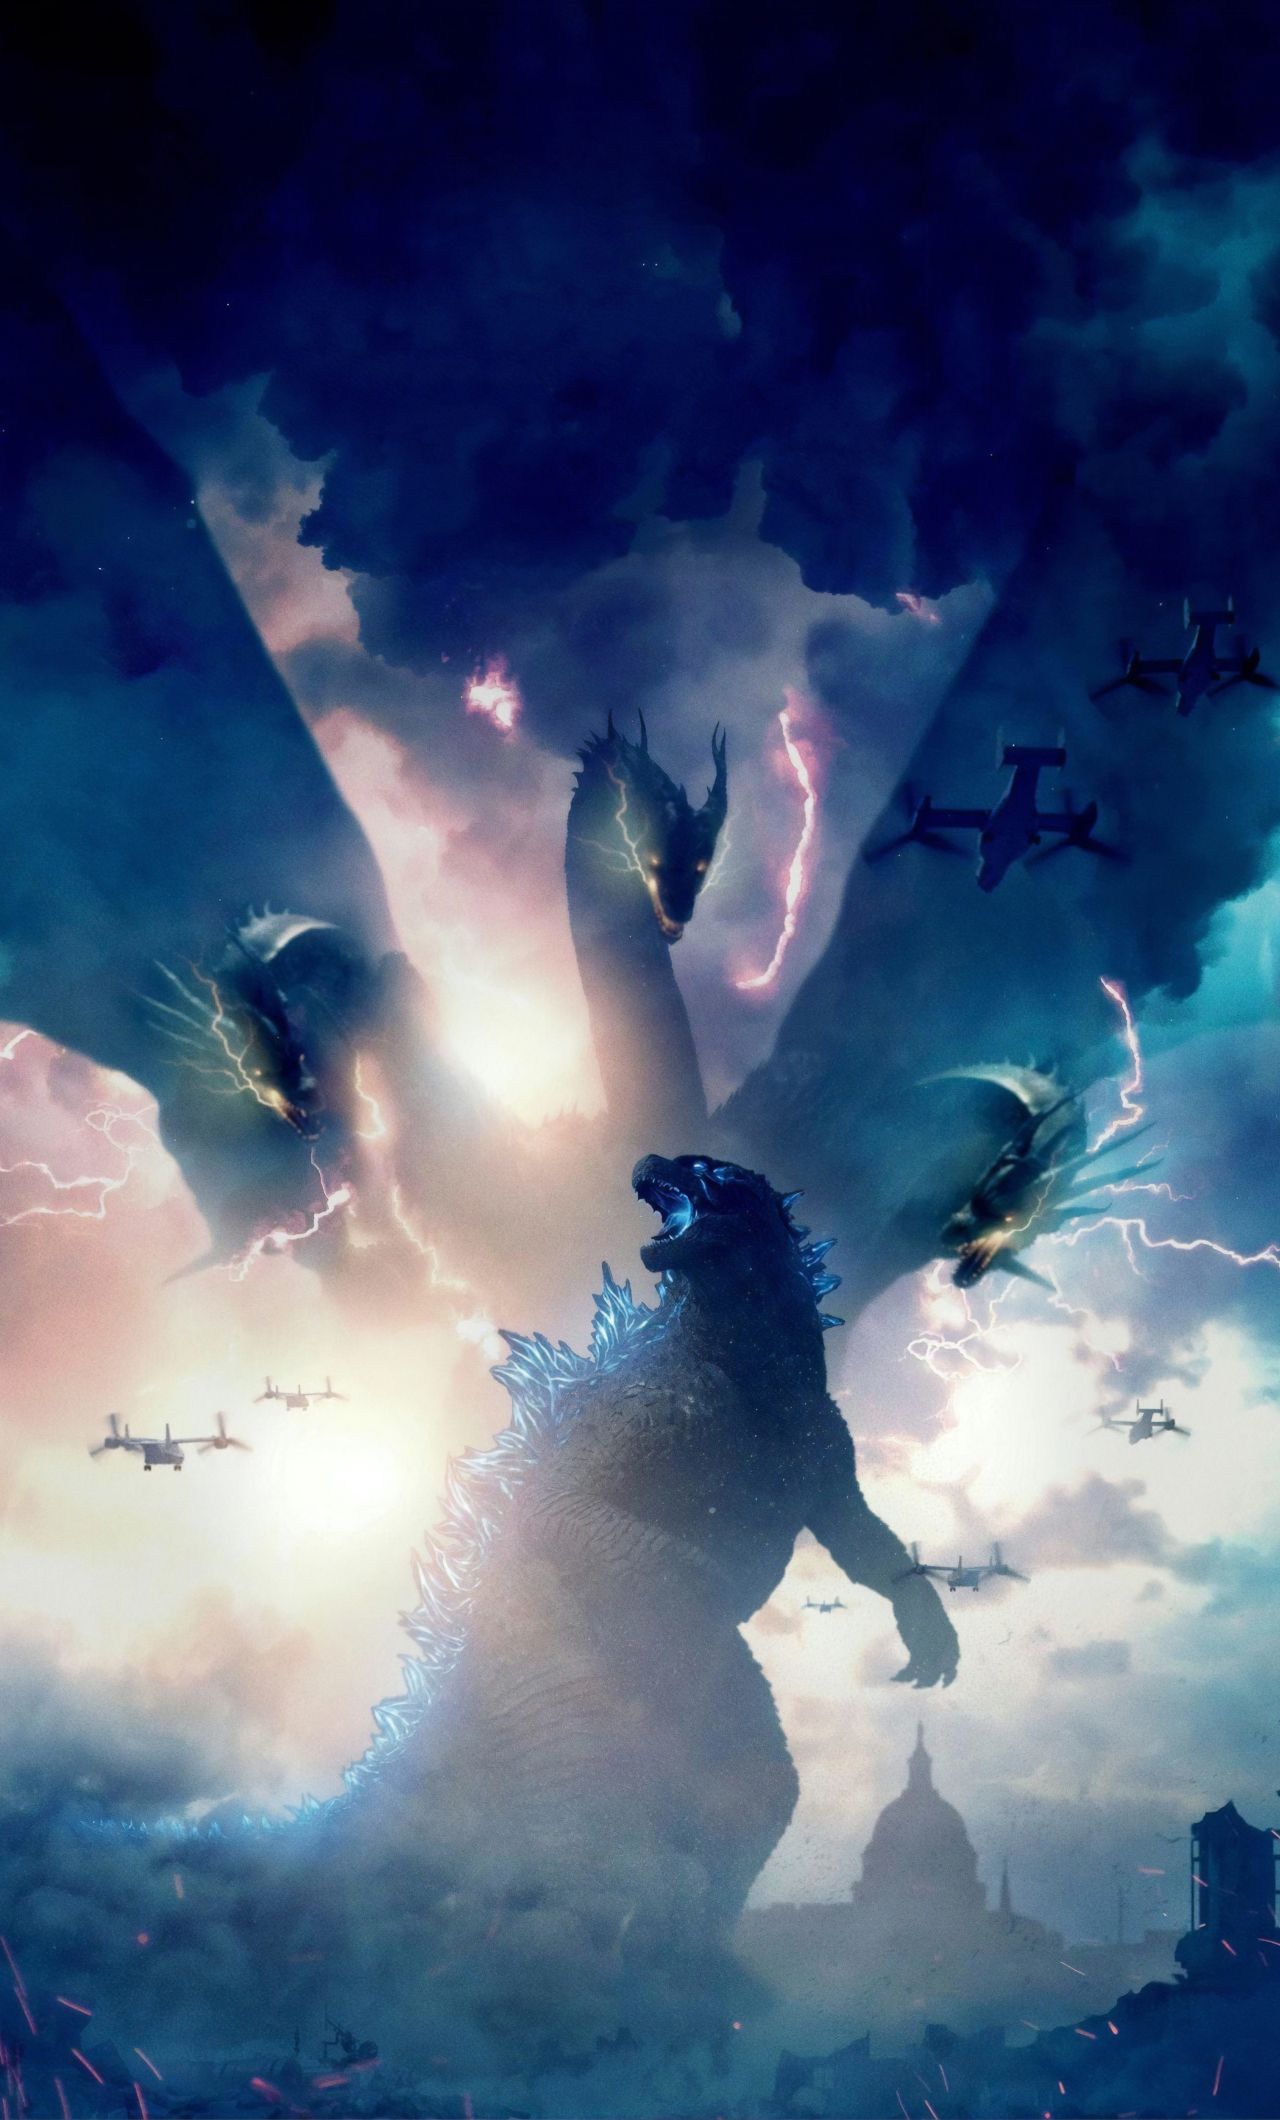 Godzilla King of the Monsters Movie 2019 iPhone 6 plus Wallpaper, HD Movies 4K Wallpaper, Image, Photo and Background